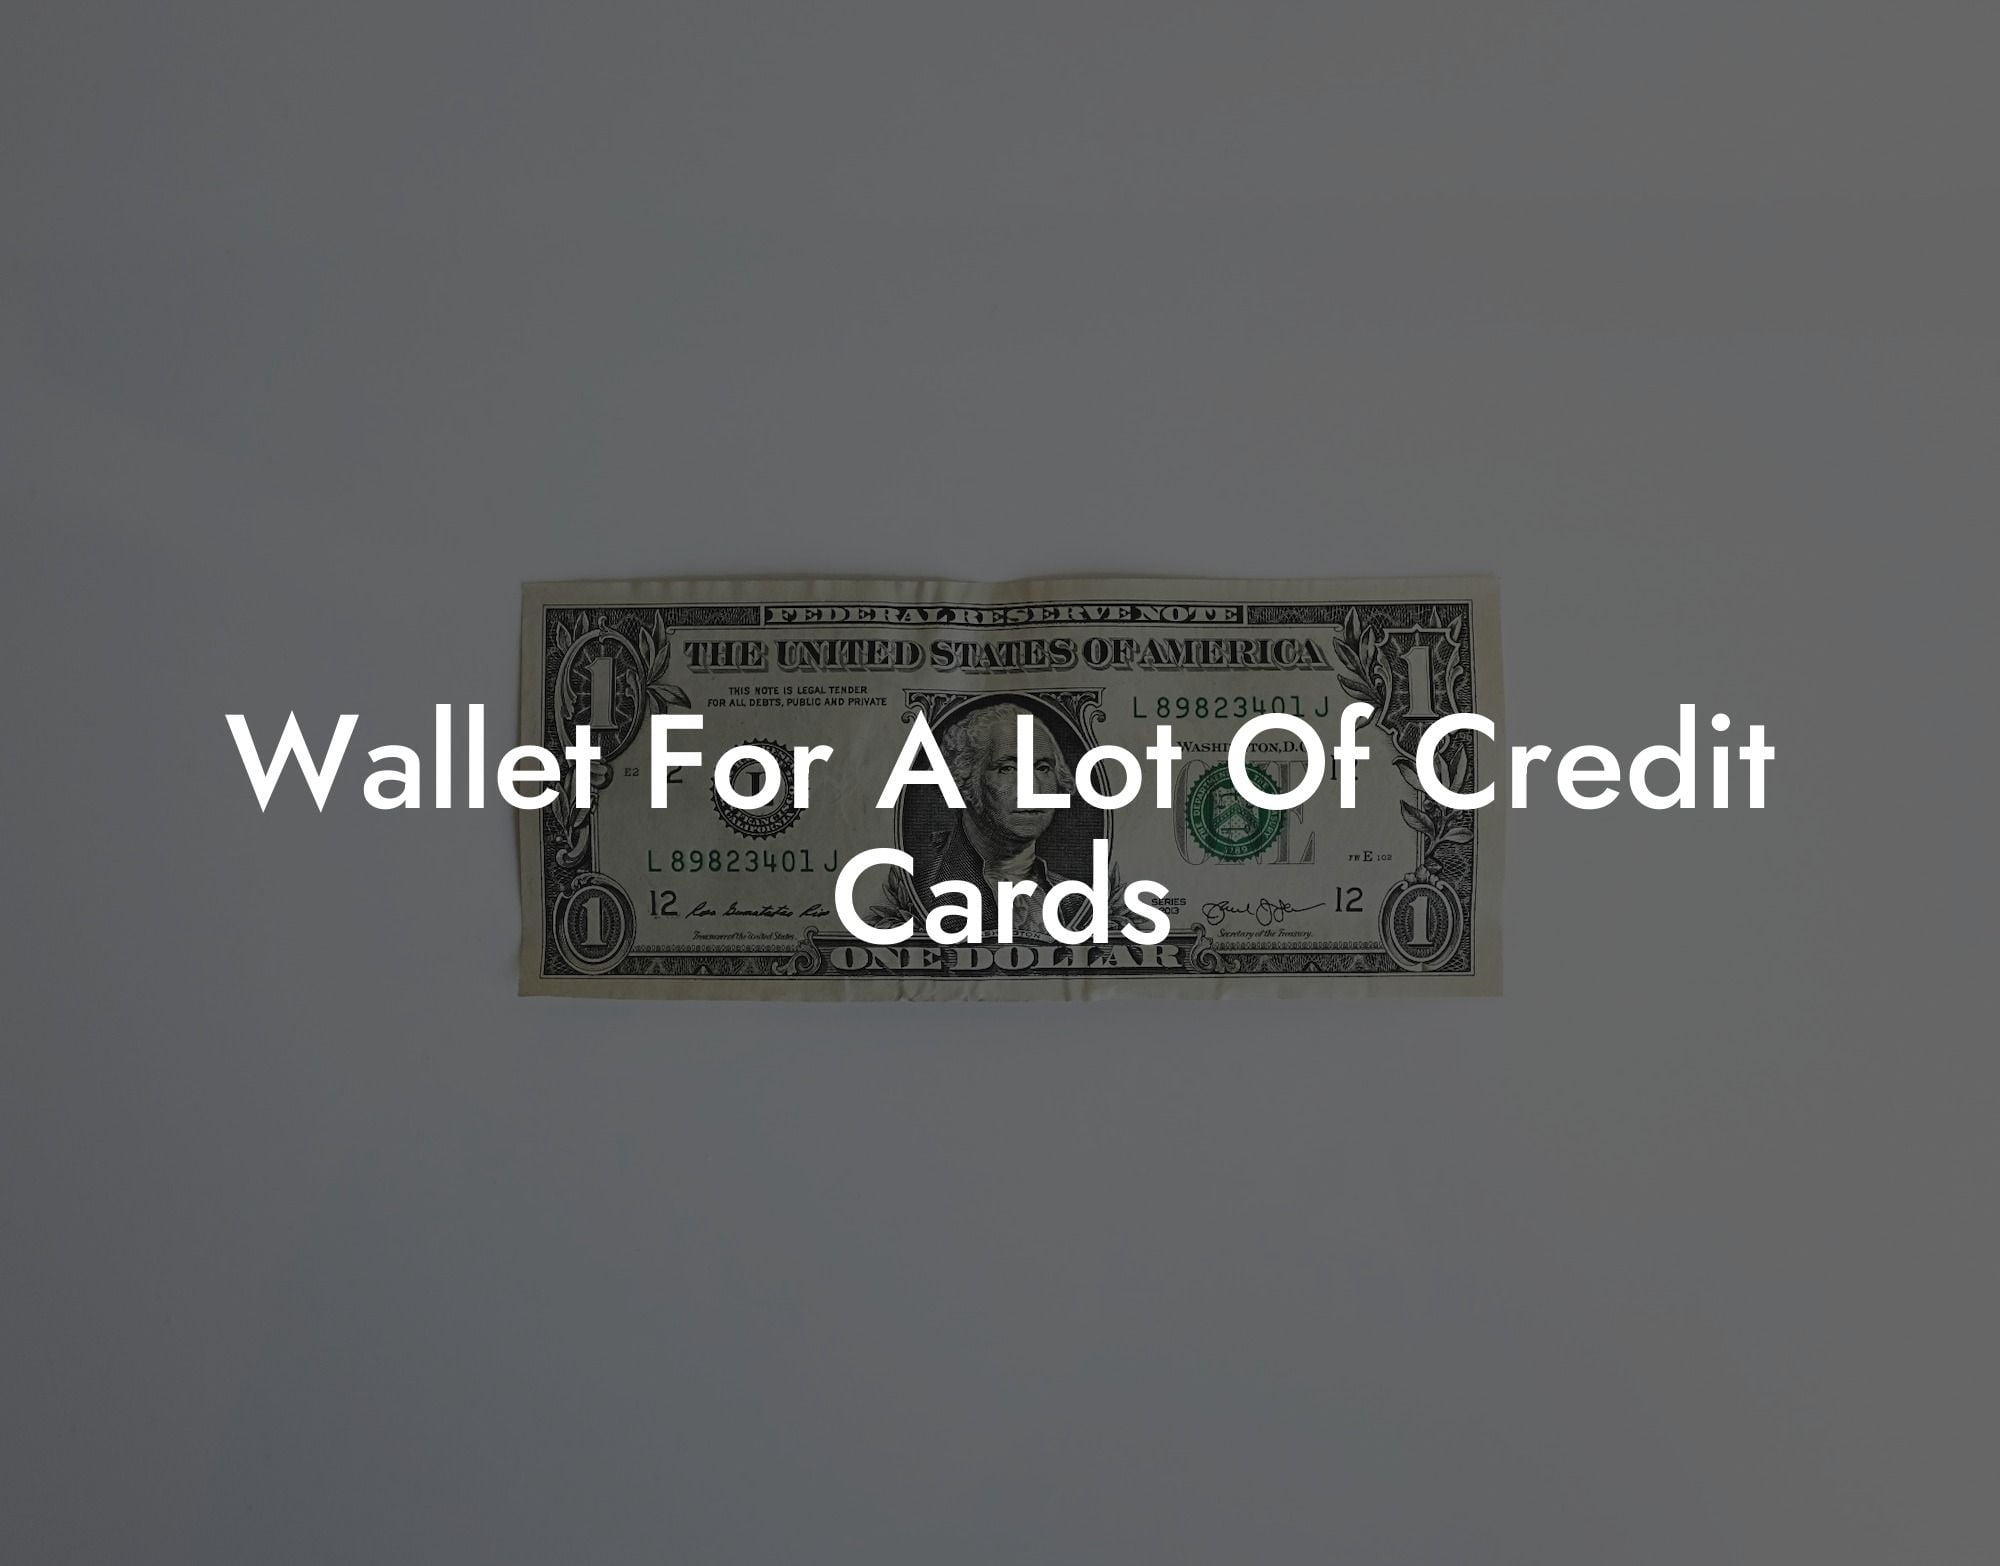 Wallet For A Lot Of Credit Cards